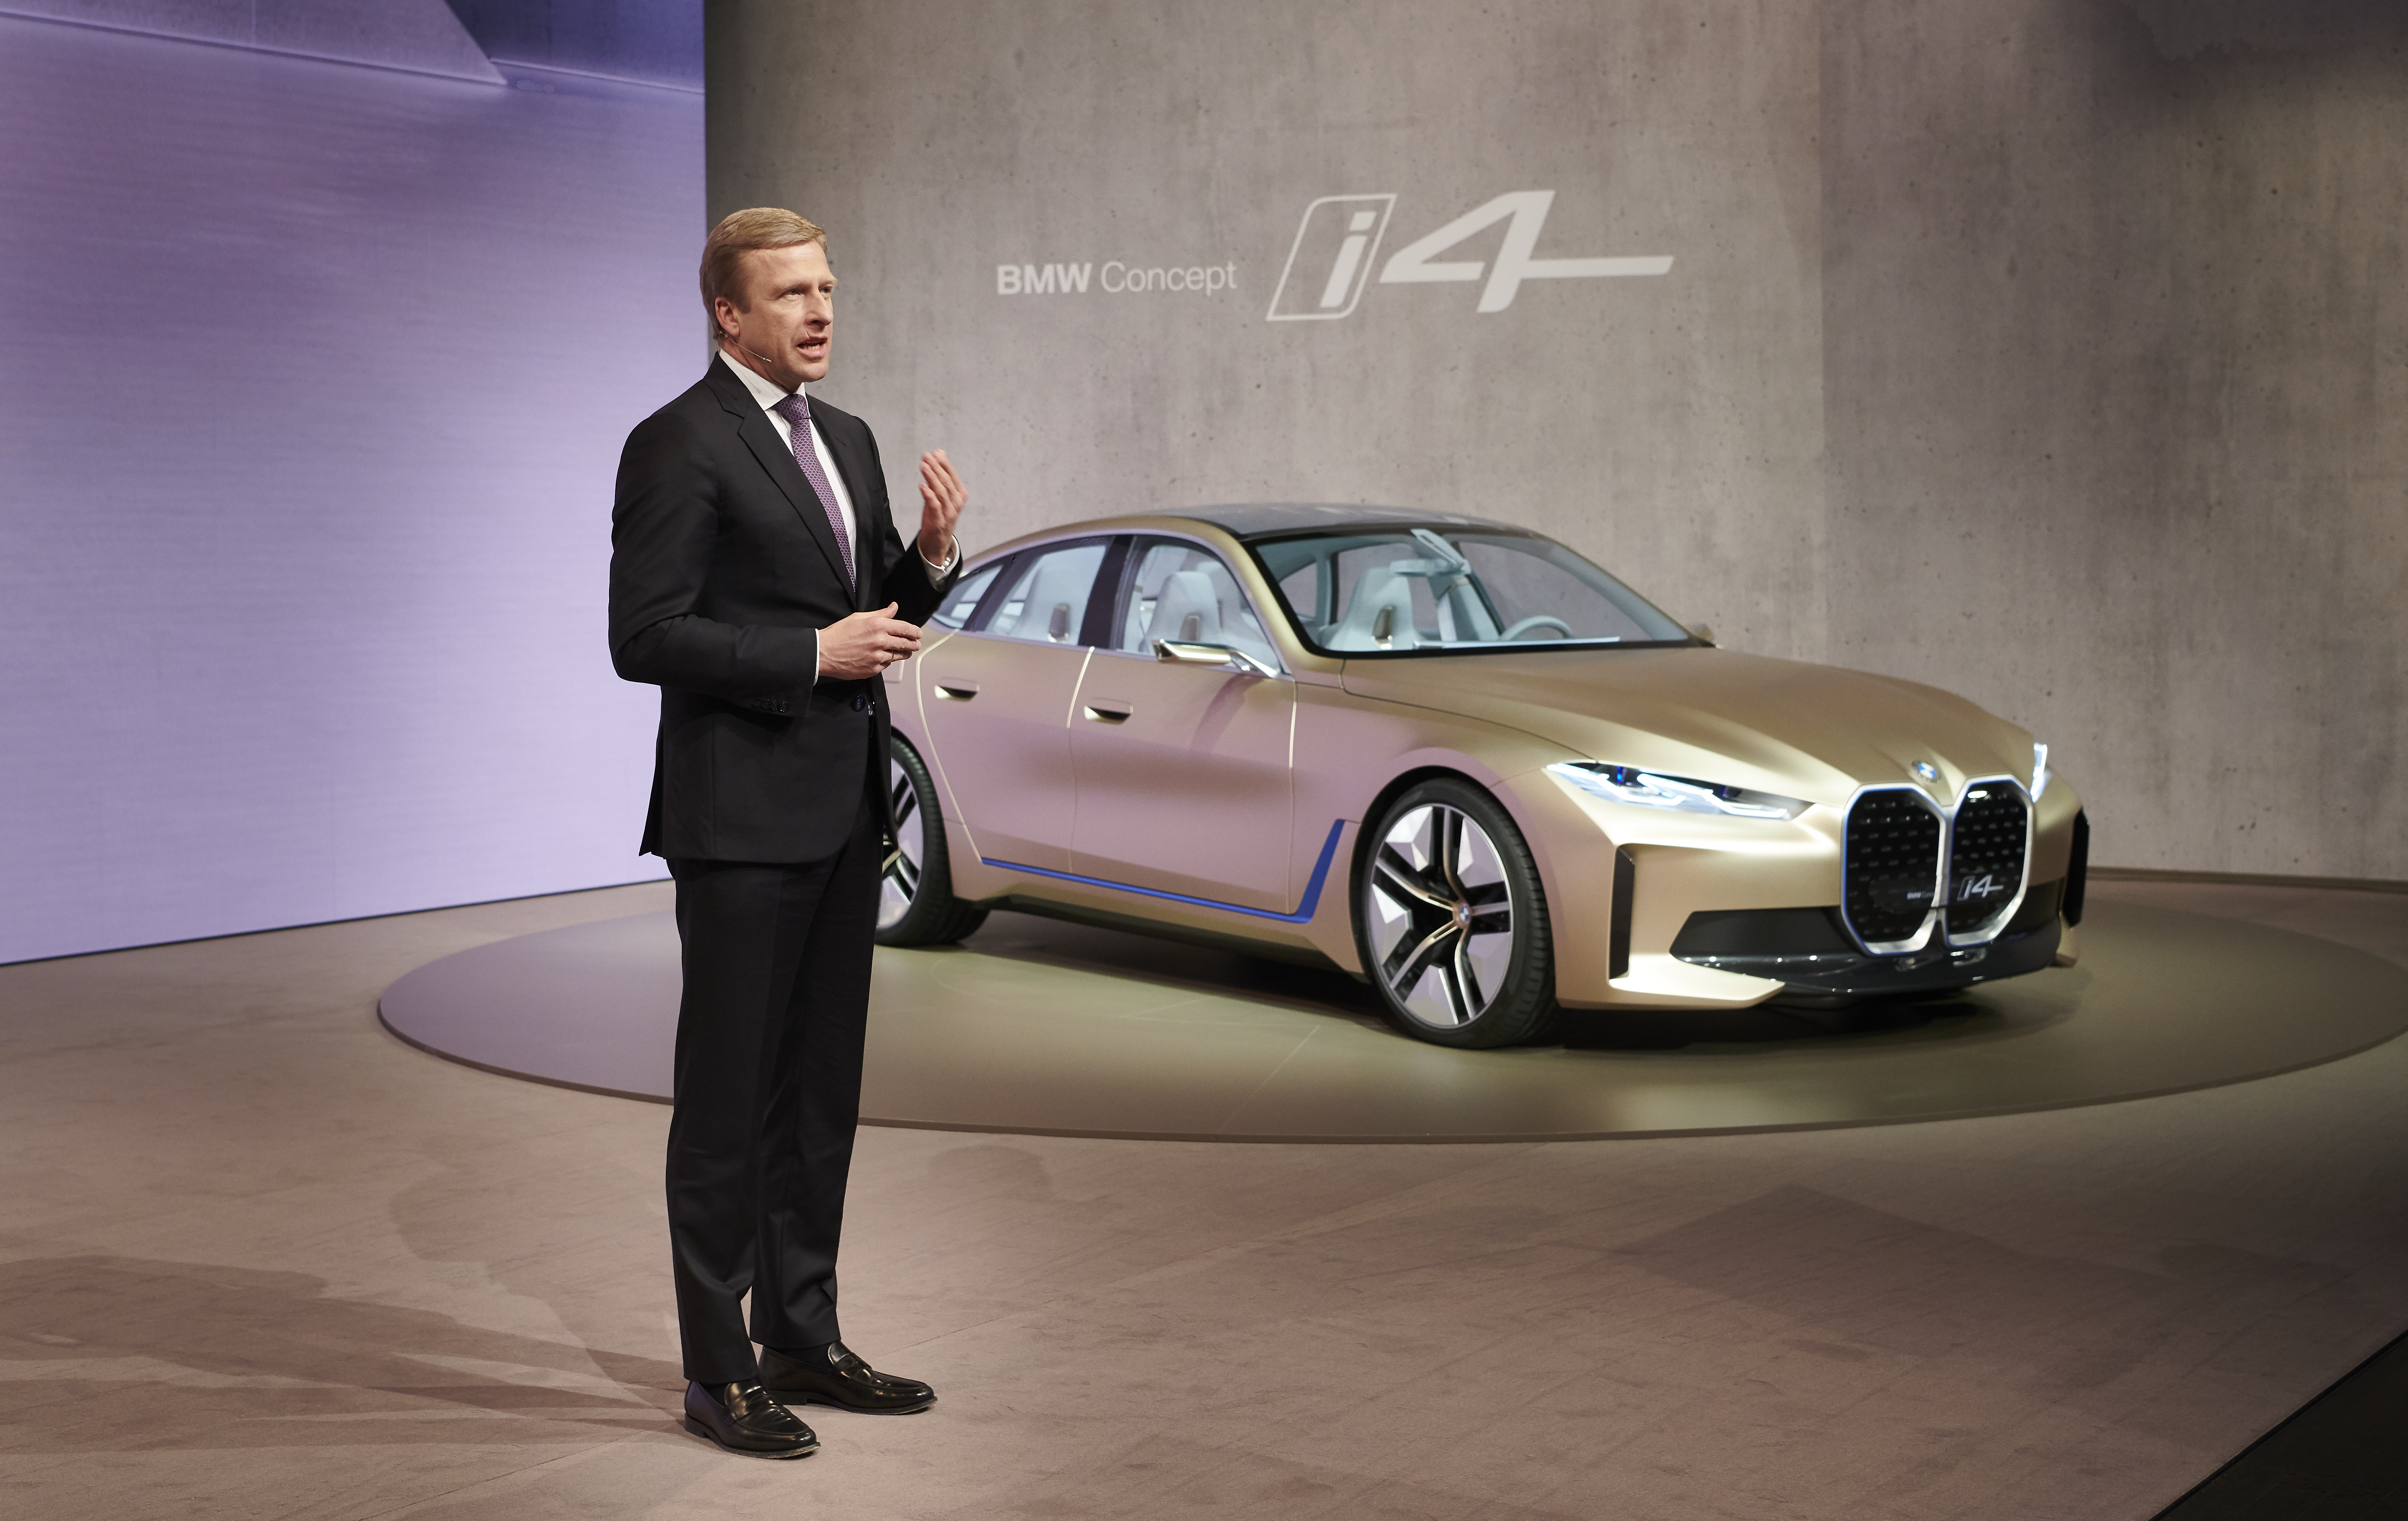 BMW Group plans over 30 billion euros on future-oriented technologies up to 2025